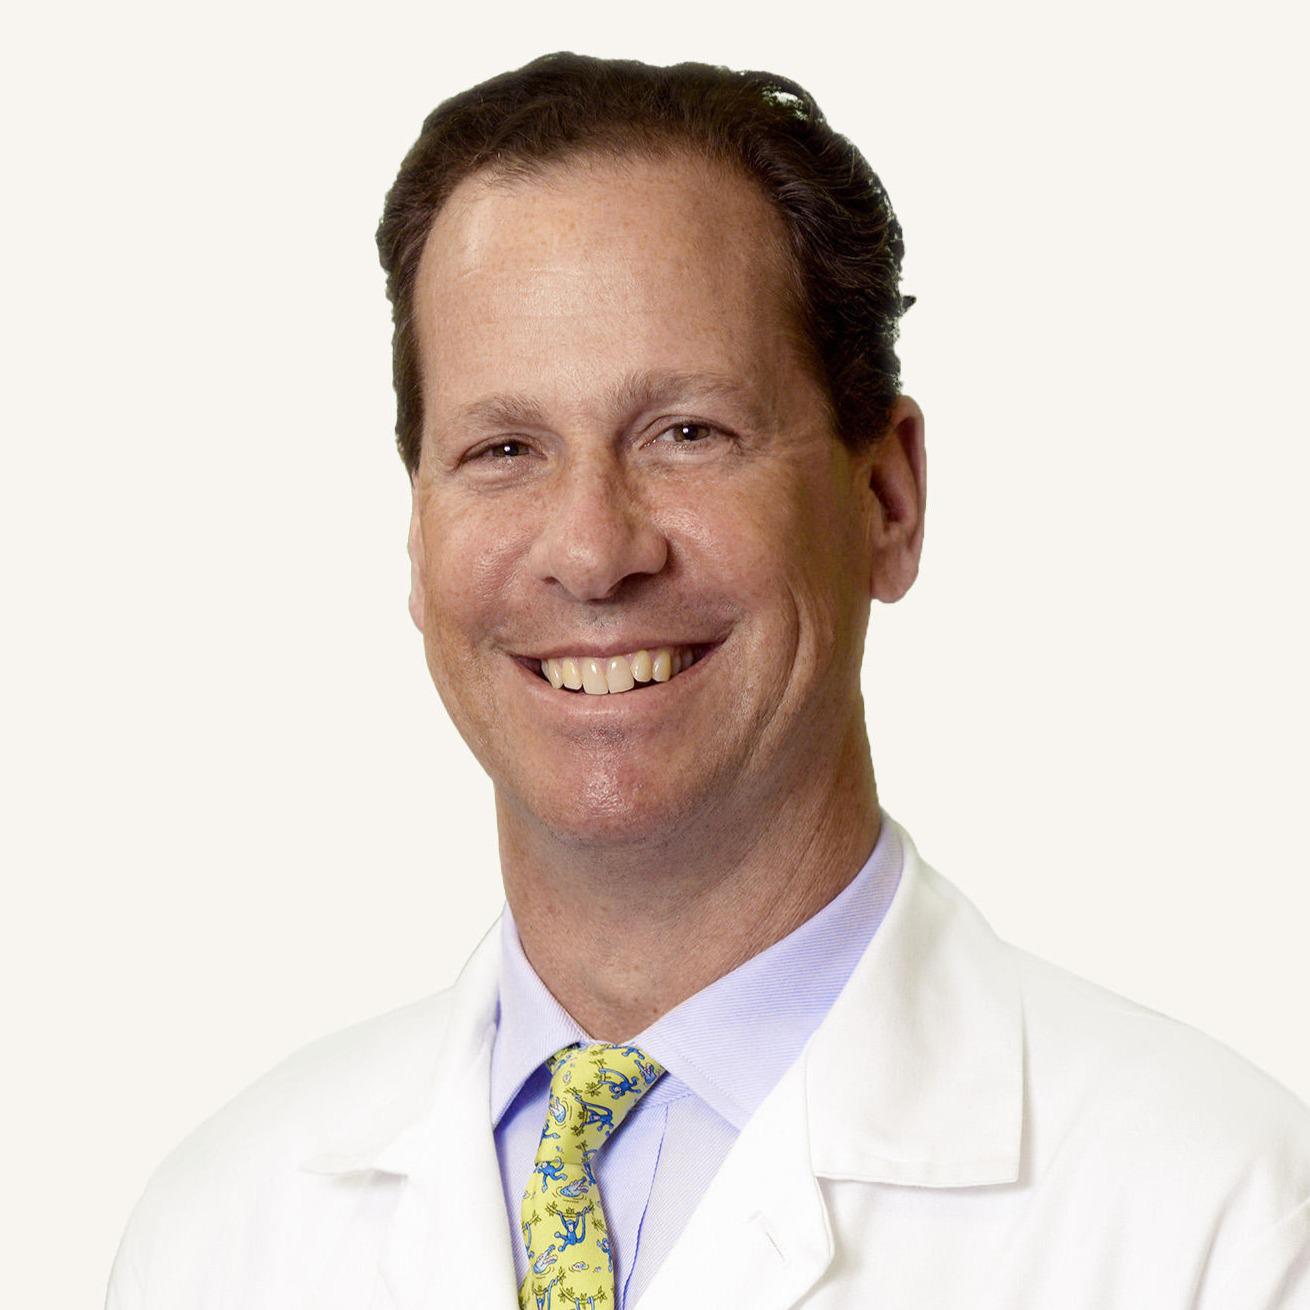 COPPER FIT® ANNOUNCES CHIEF MEDICAL OFFICER, STRUAN COLEMAN, MD, PhD